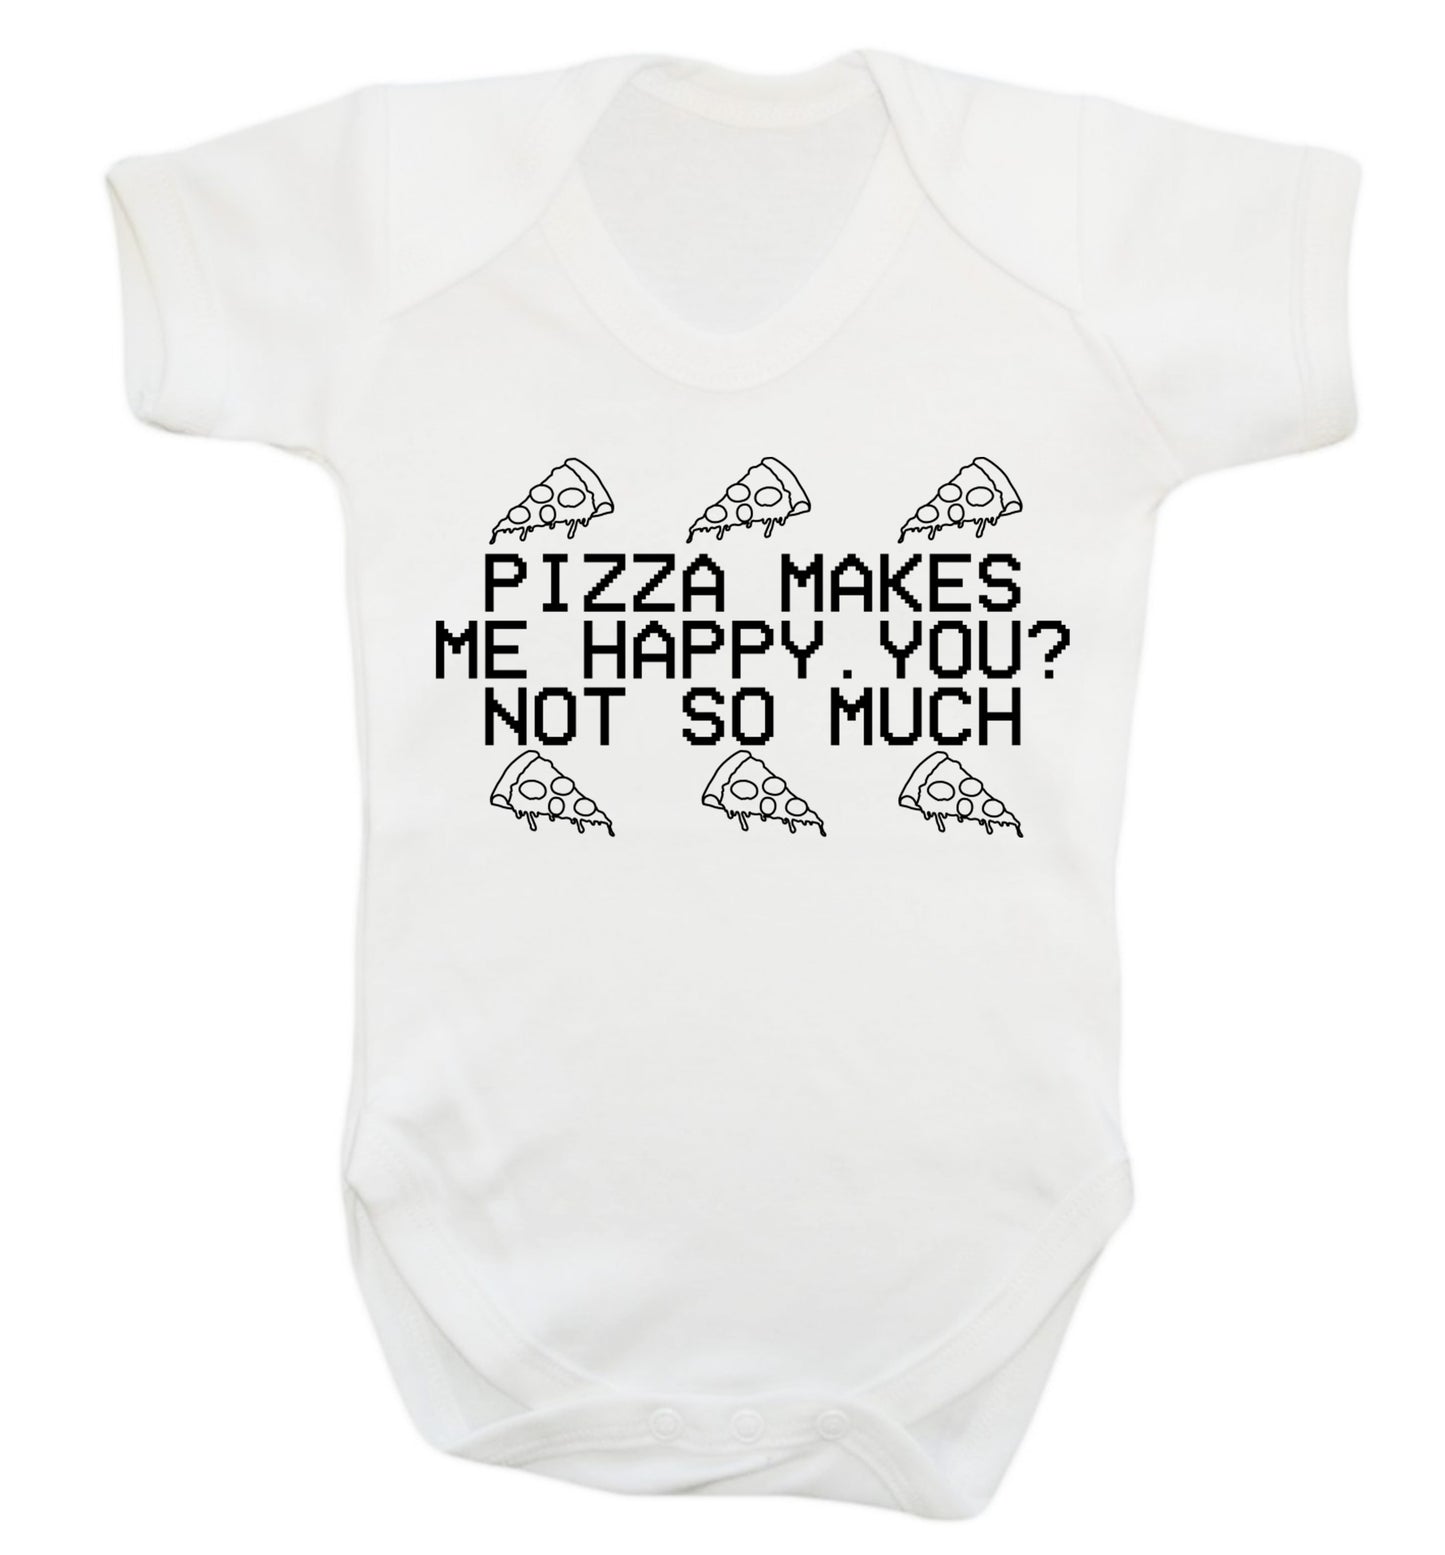 Pizza makes me happy, You? Not so much Baby Vest white 18-24 months